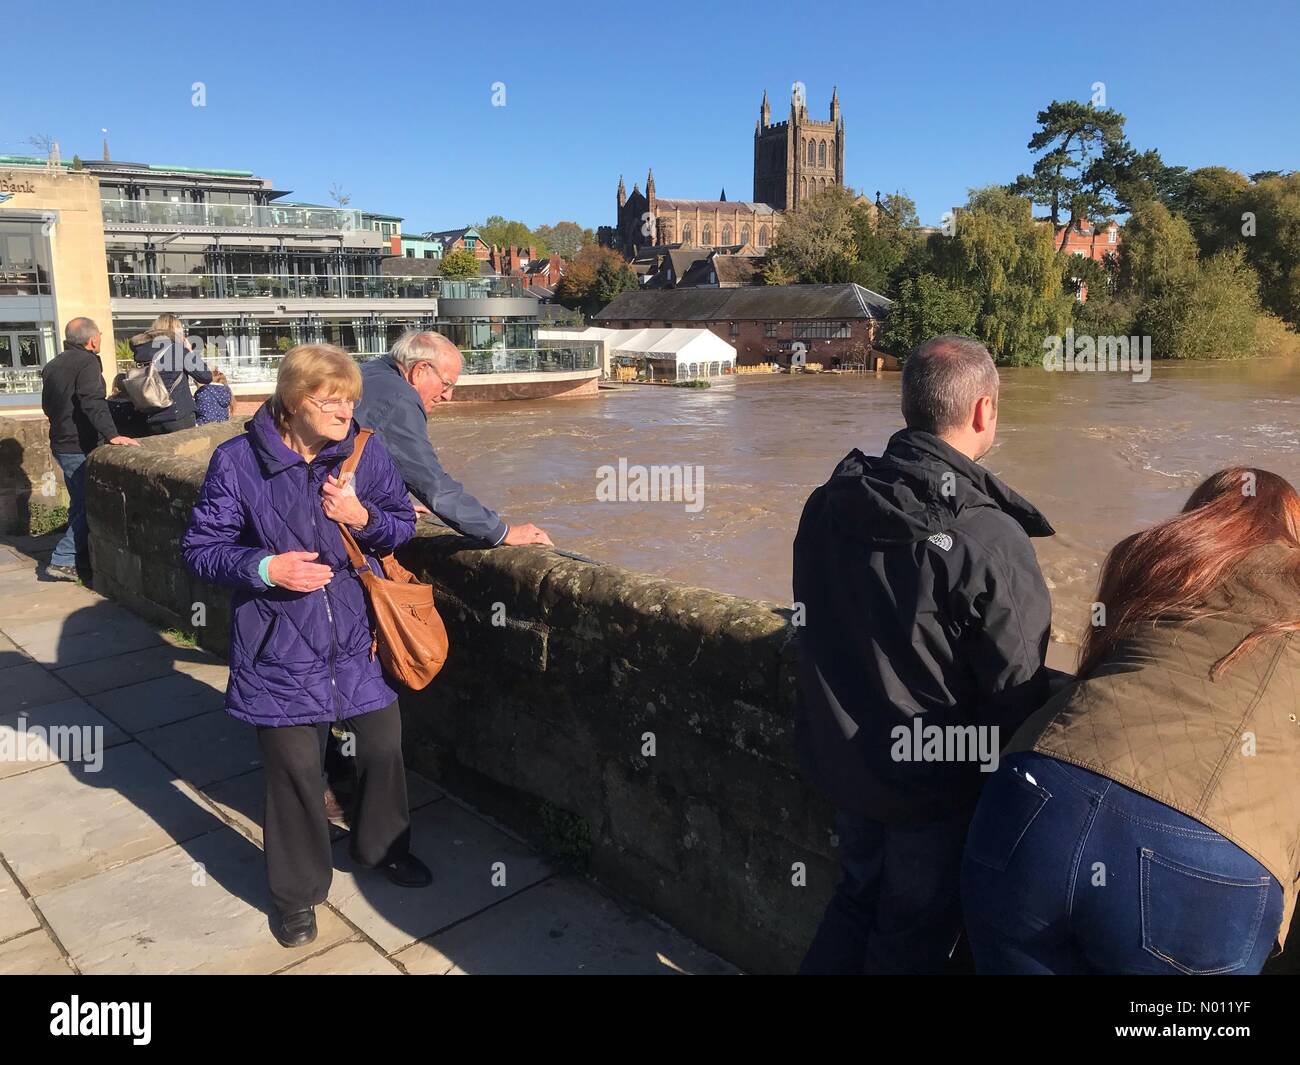 Hereford, UK. 27th Oct, 2019. UK Weather Flooding at Hereford UK - Crowds father to watch as the the River Wye is extremely high at Hereford with some flooding on the left bank including the De Koffie Pot pub. Credit: Steven May / StockimoNews/Alamy Live News Stock Photo